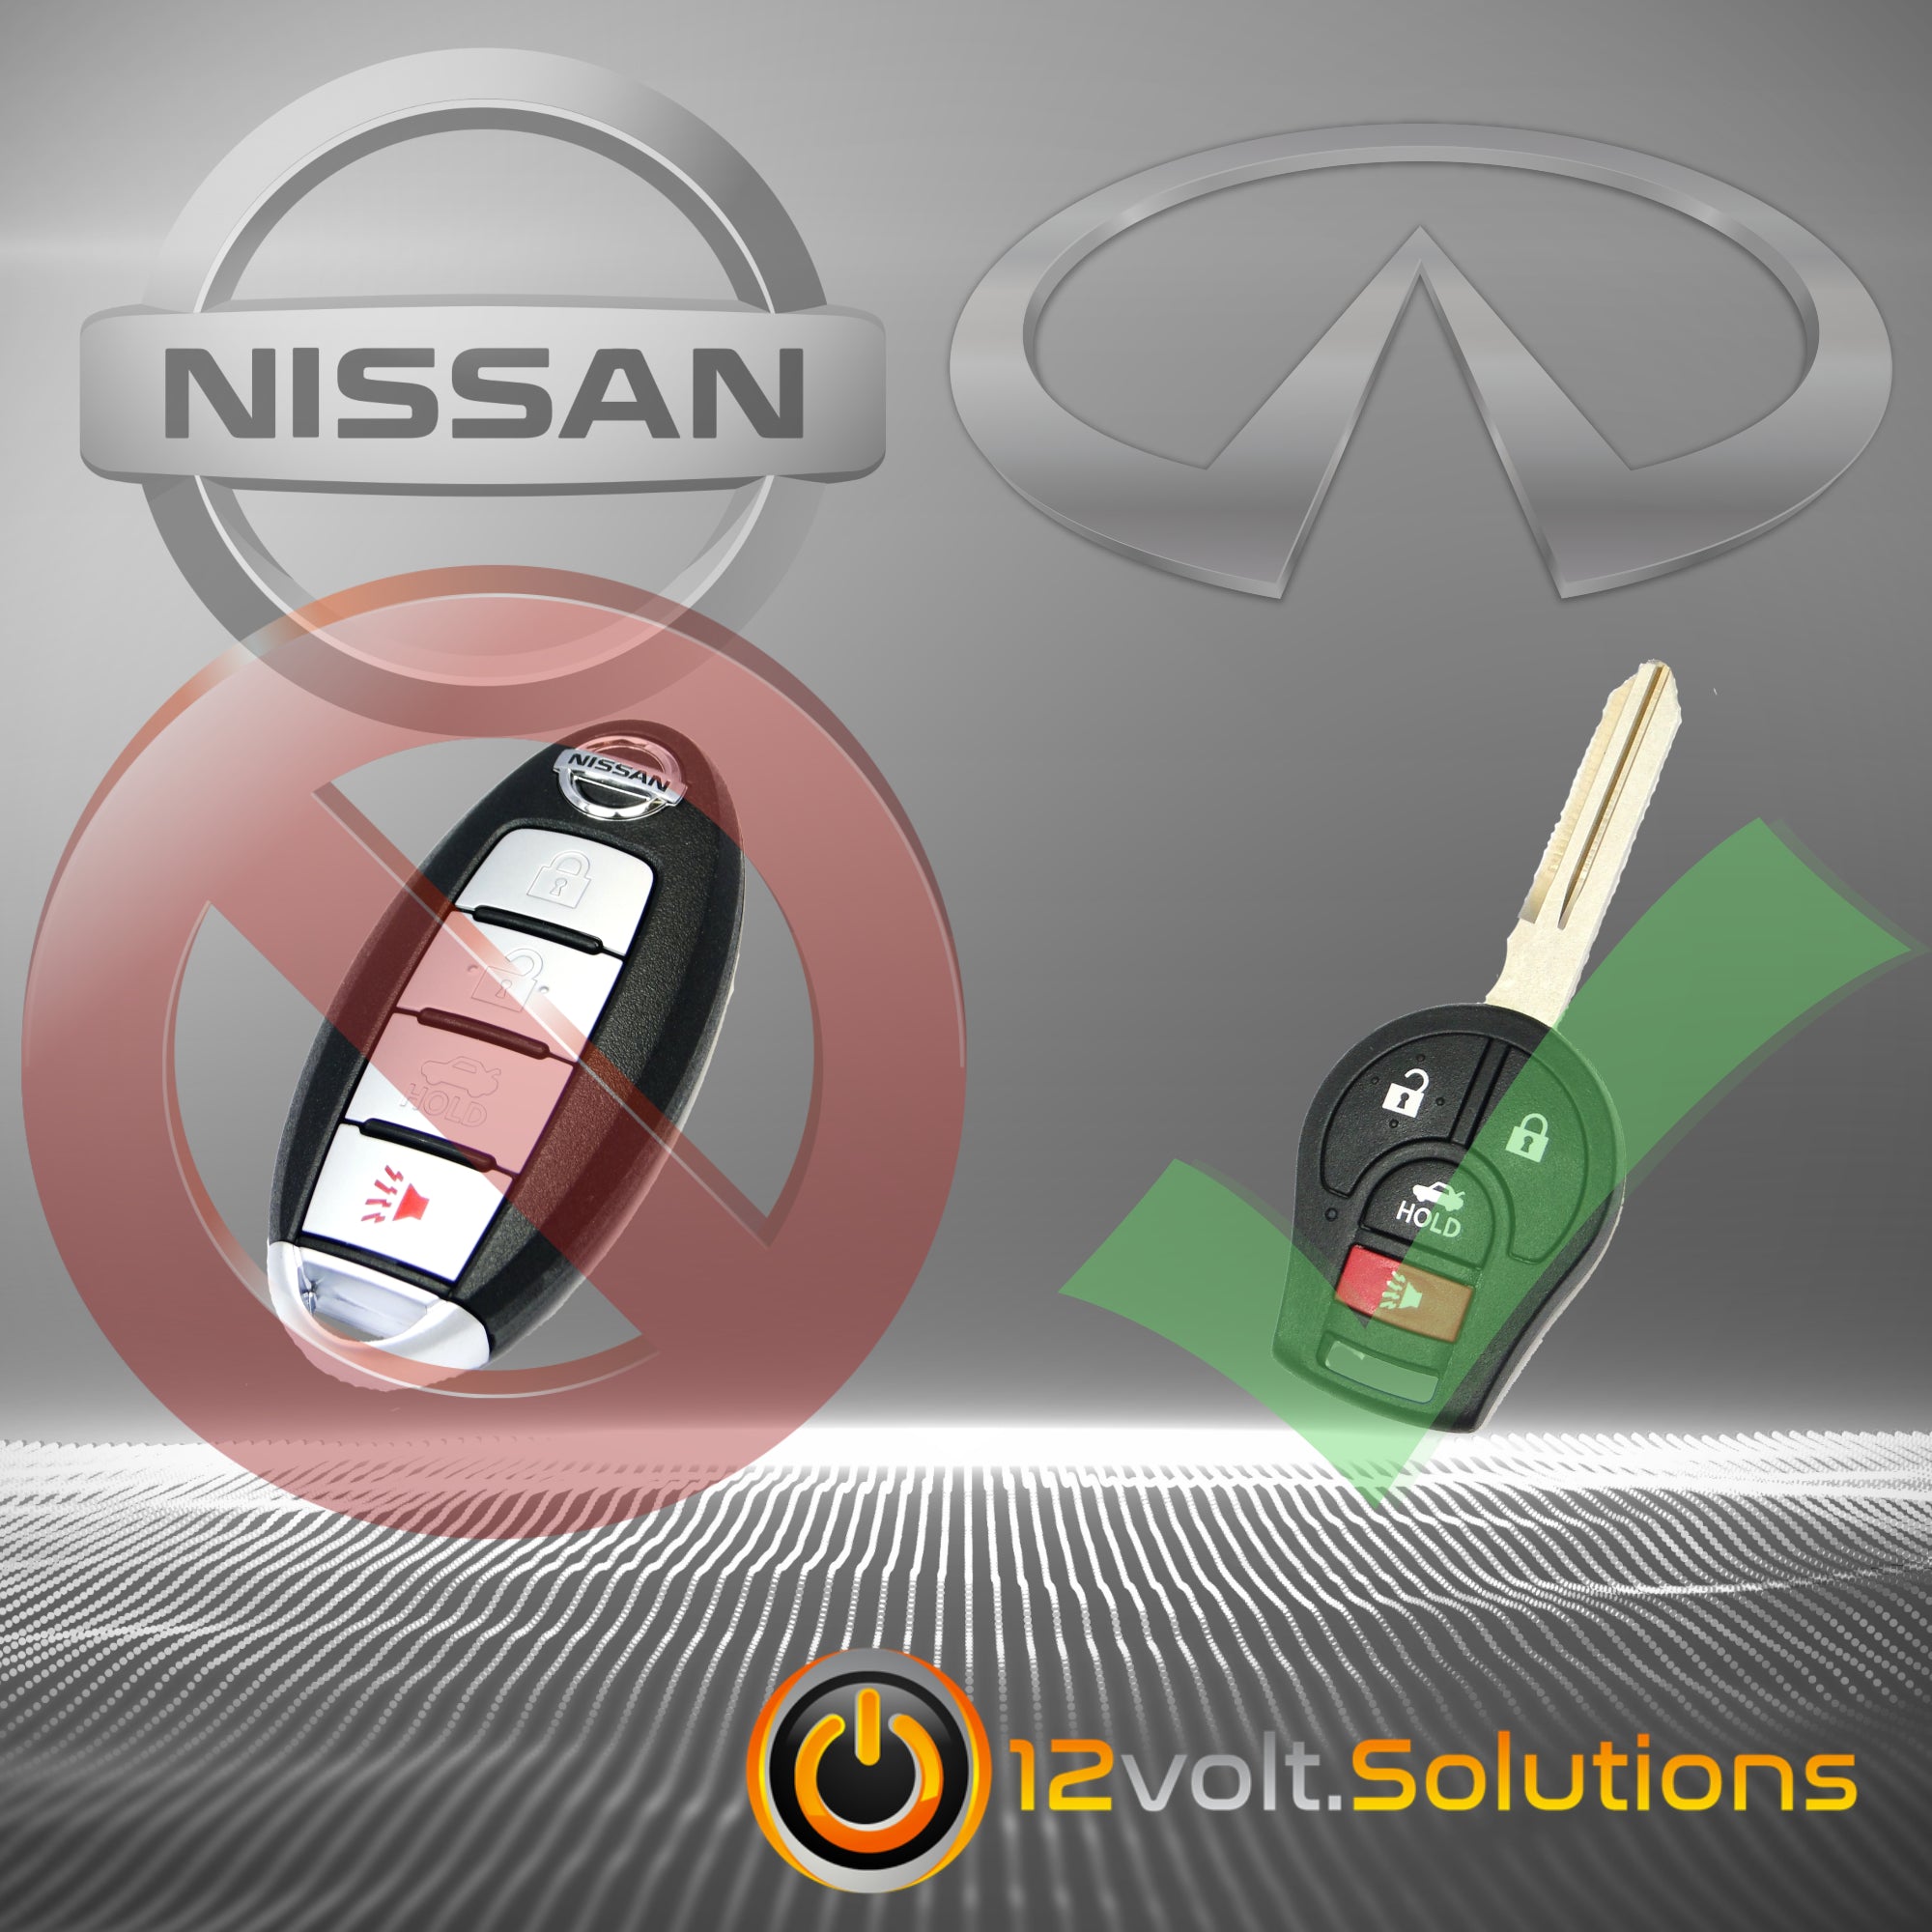 Nissan 350z Remote Start Plug and Play Kit -12Volt.Solutions